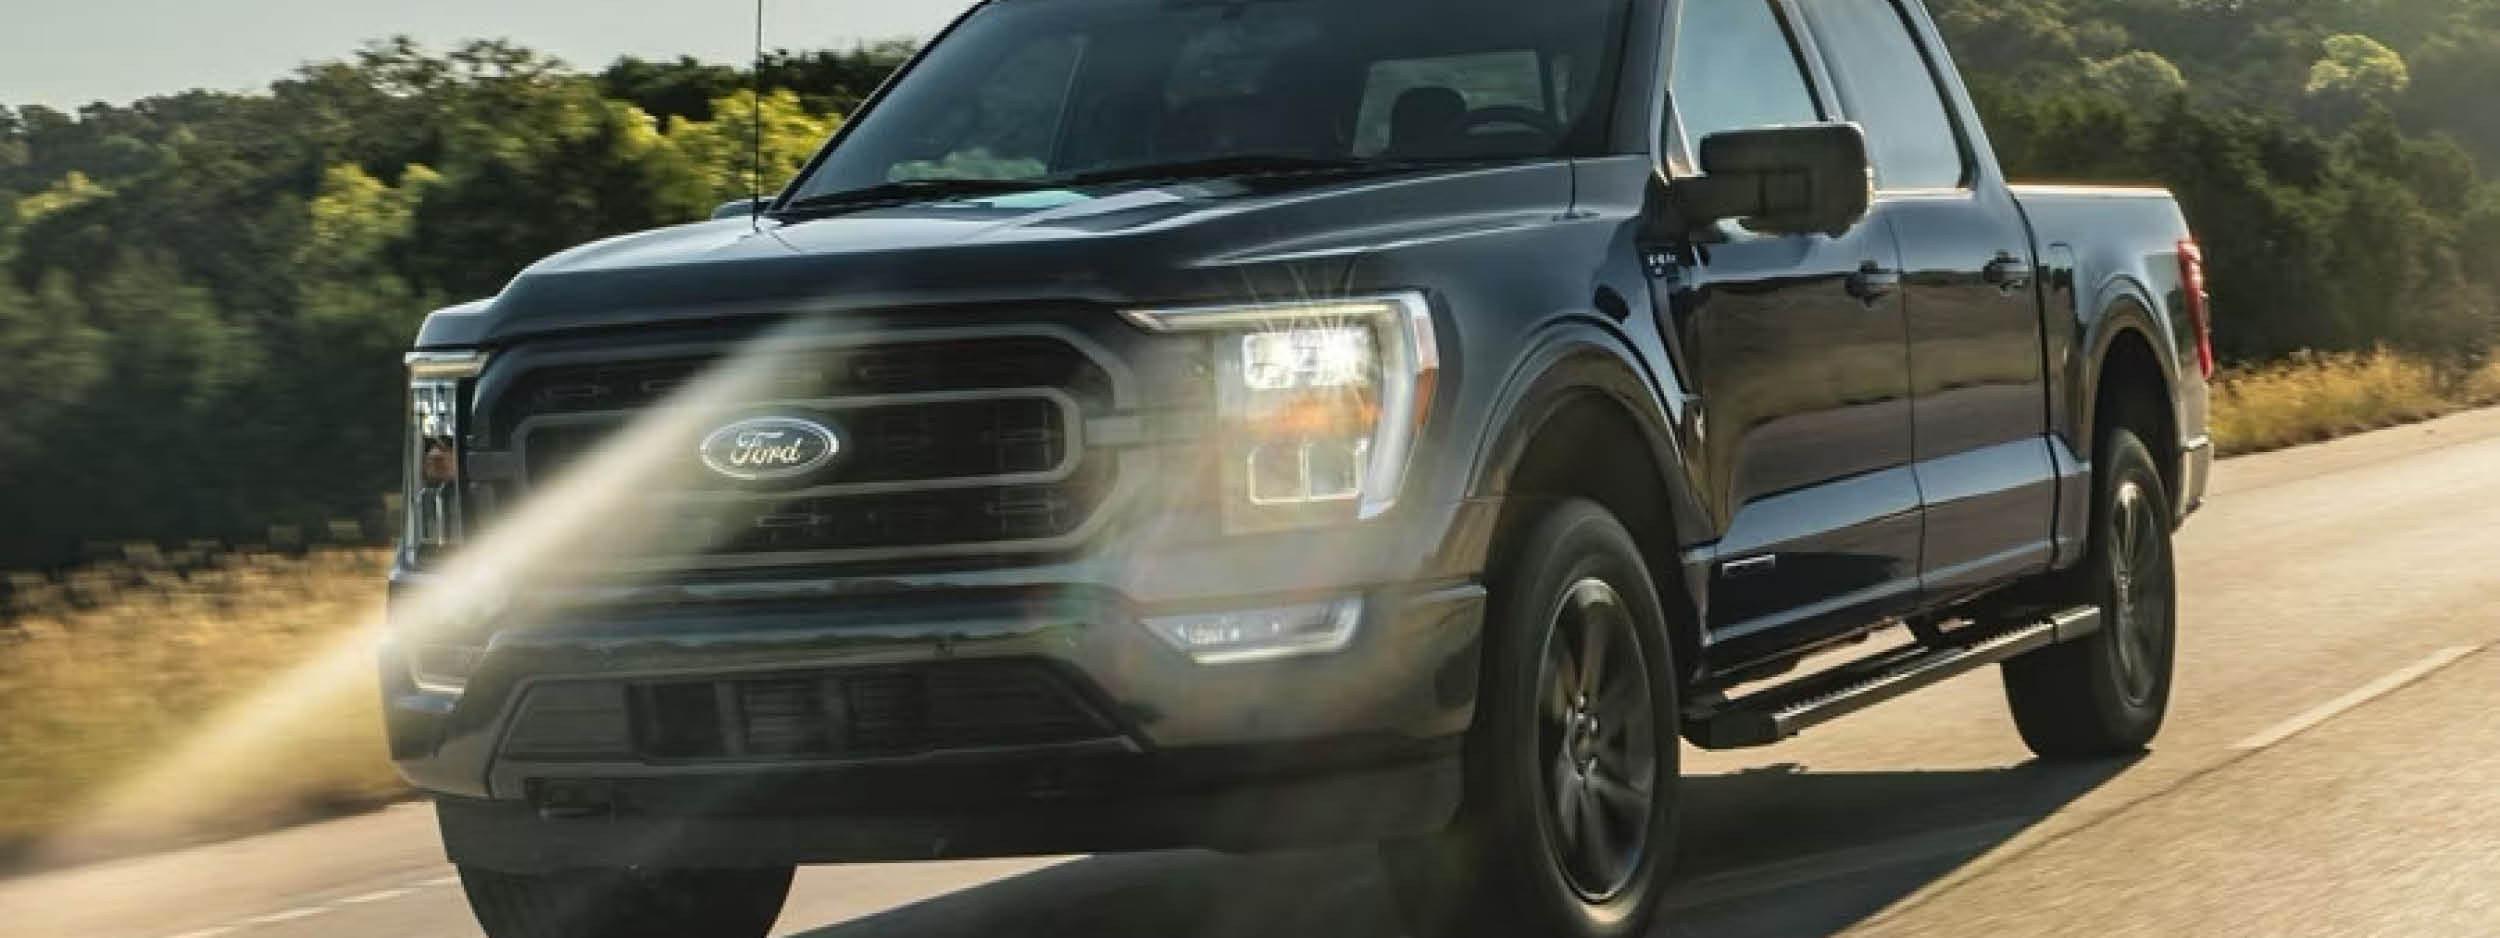 Used Ford F-150 Purchasing Guide